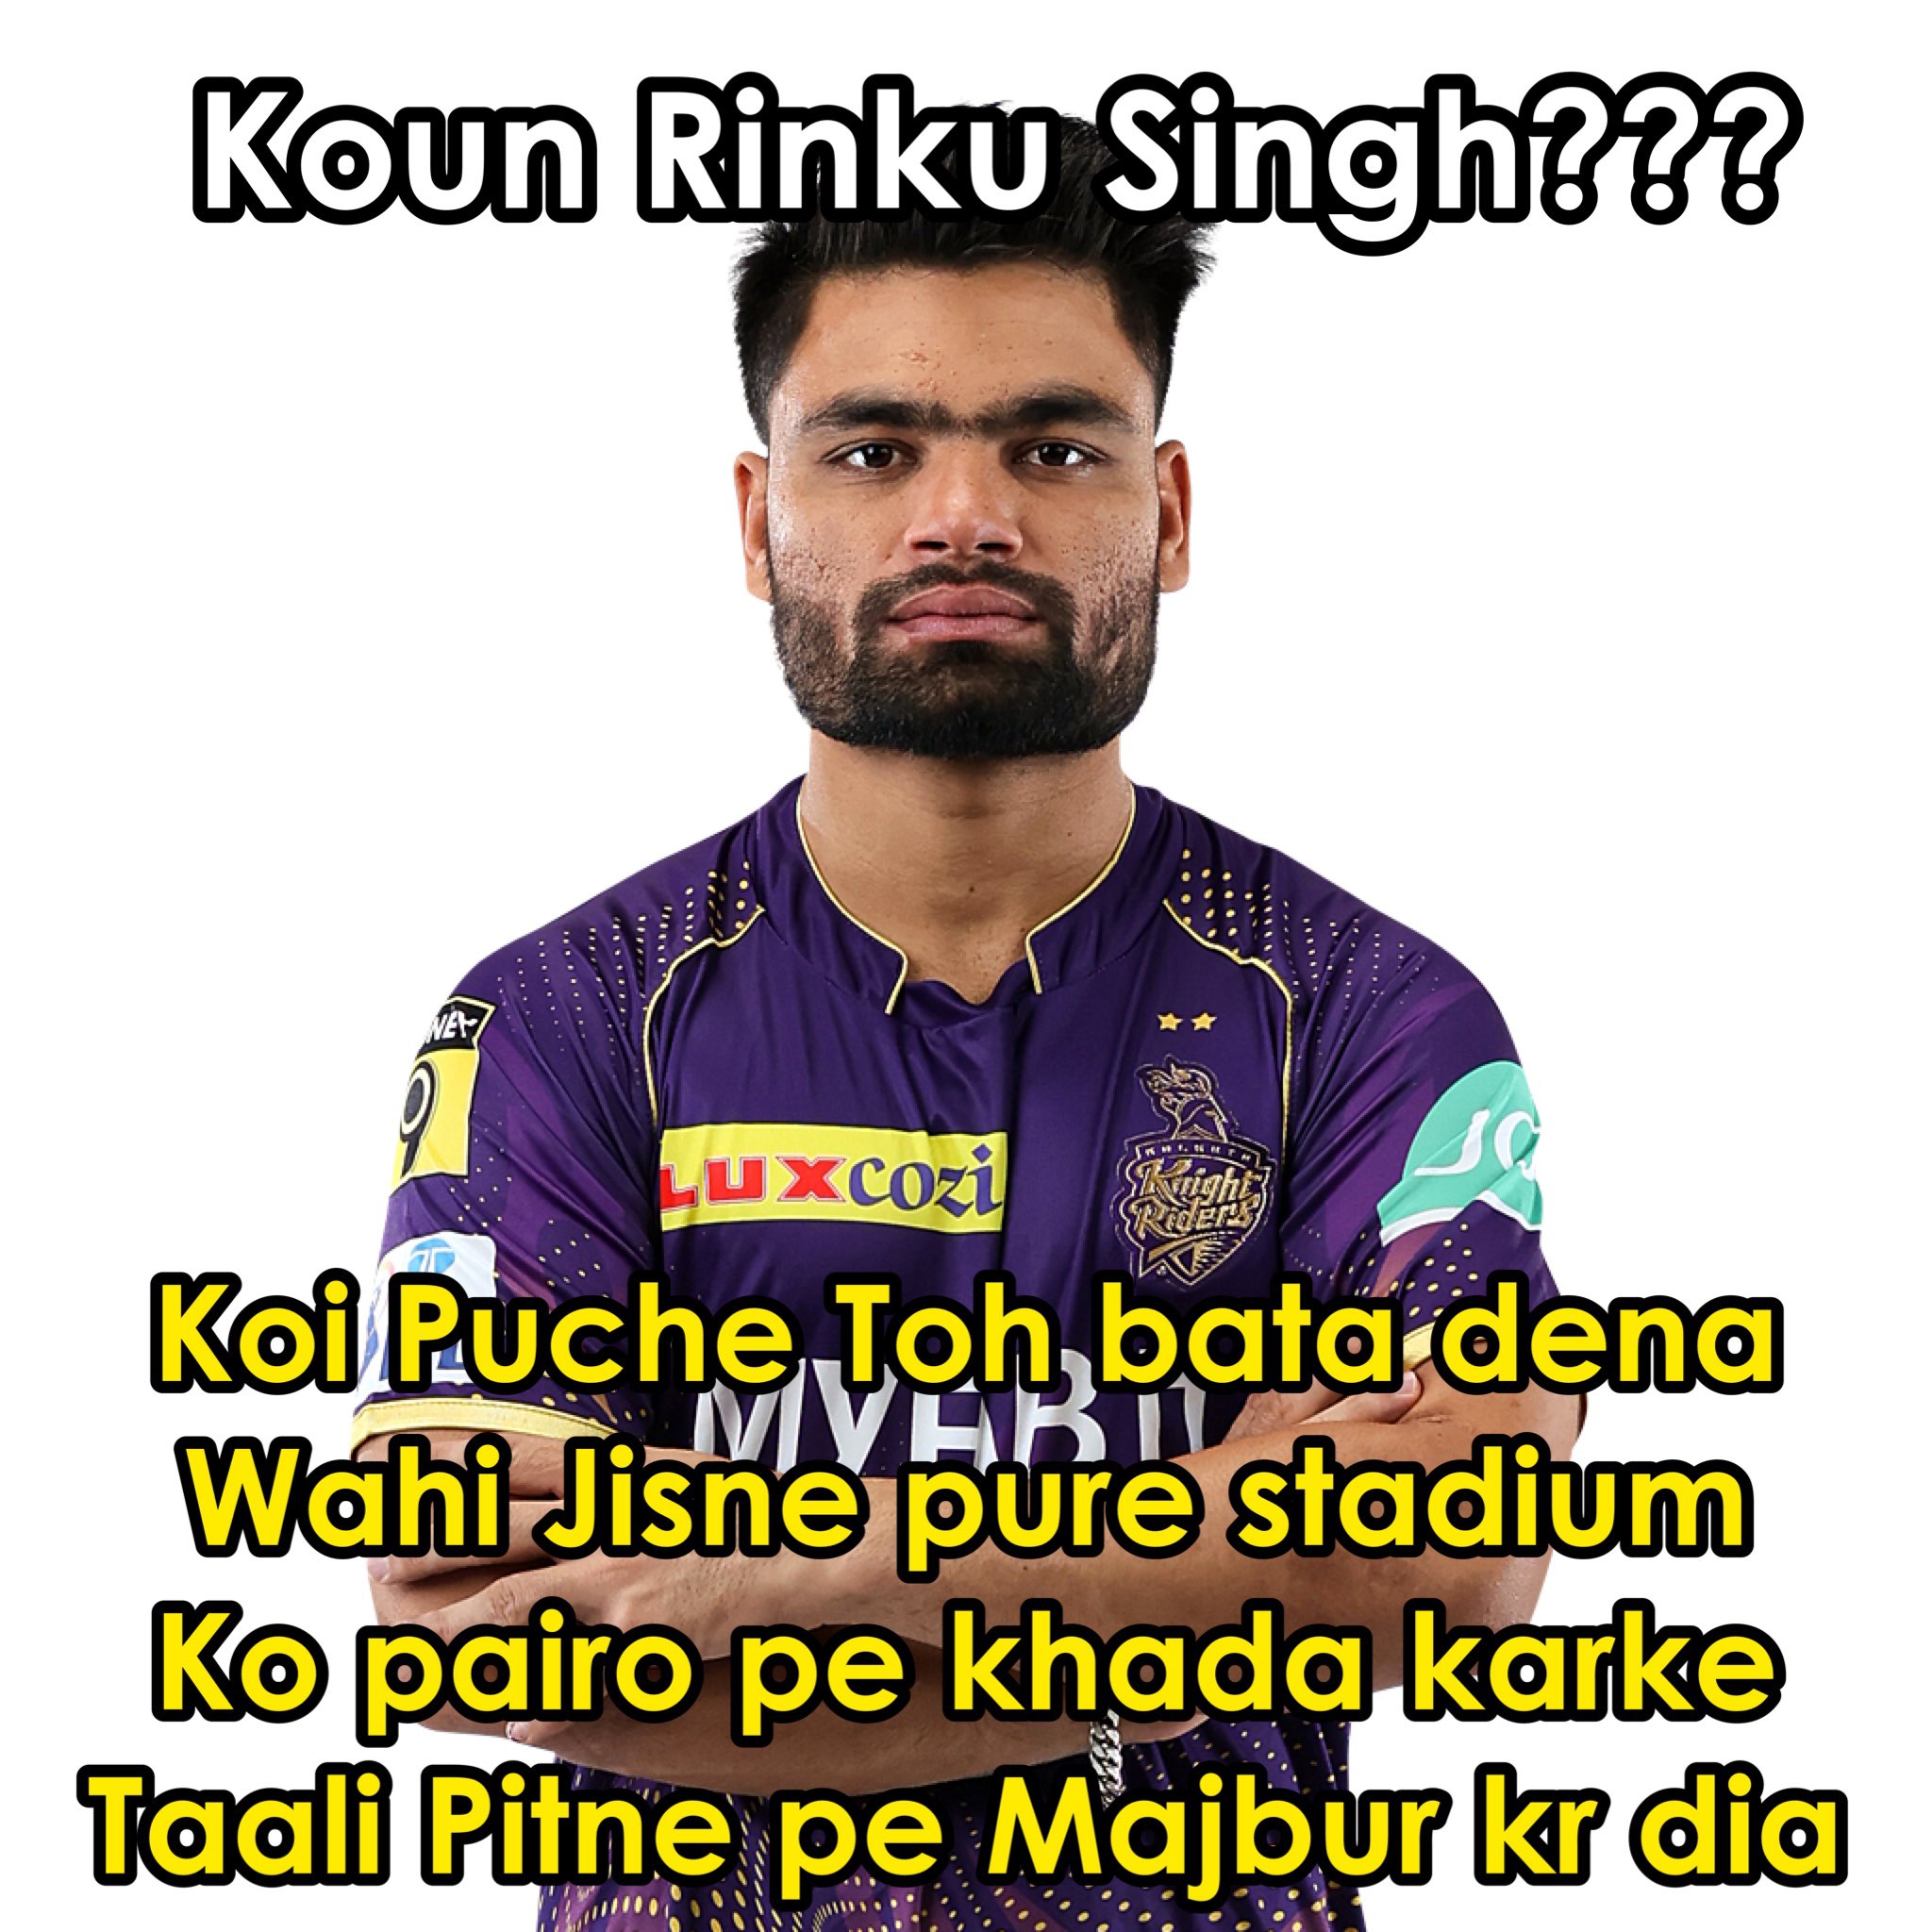 Permanent Indian Chad face for me now - Fans on Twitter draw hilarious  comparisons between Rinku Singh & popular meme